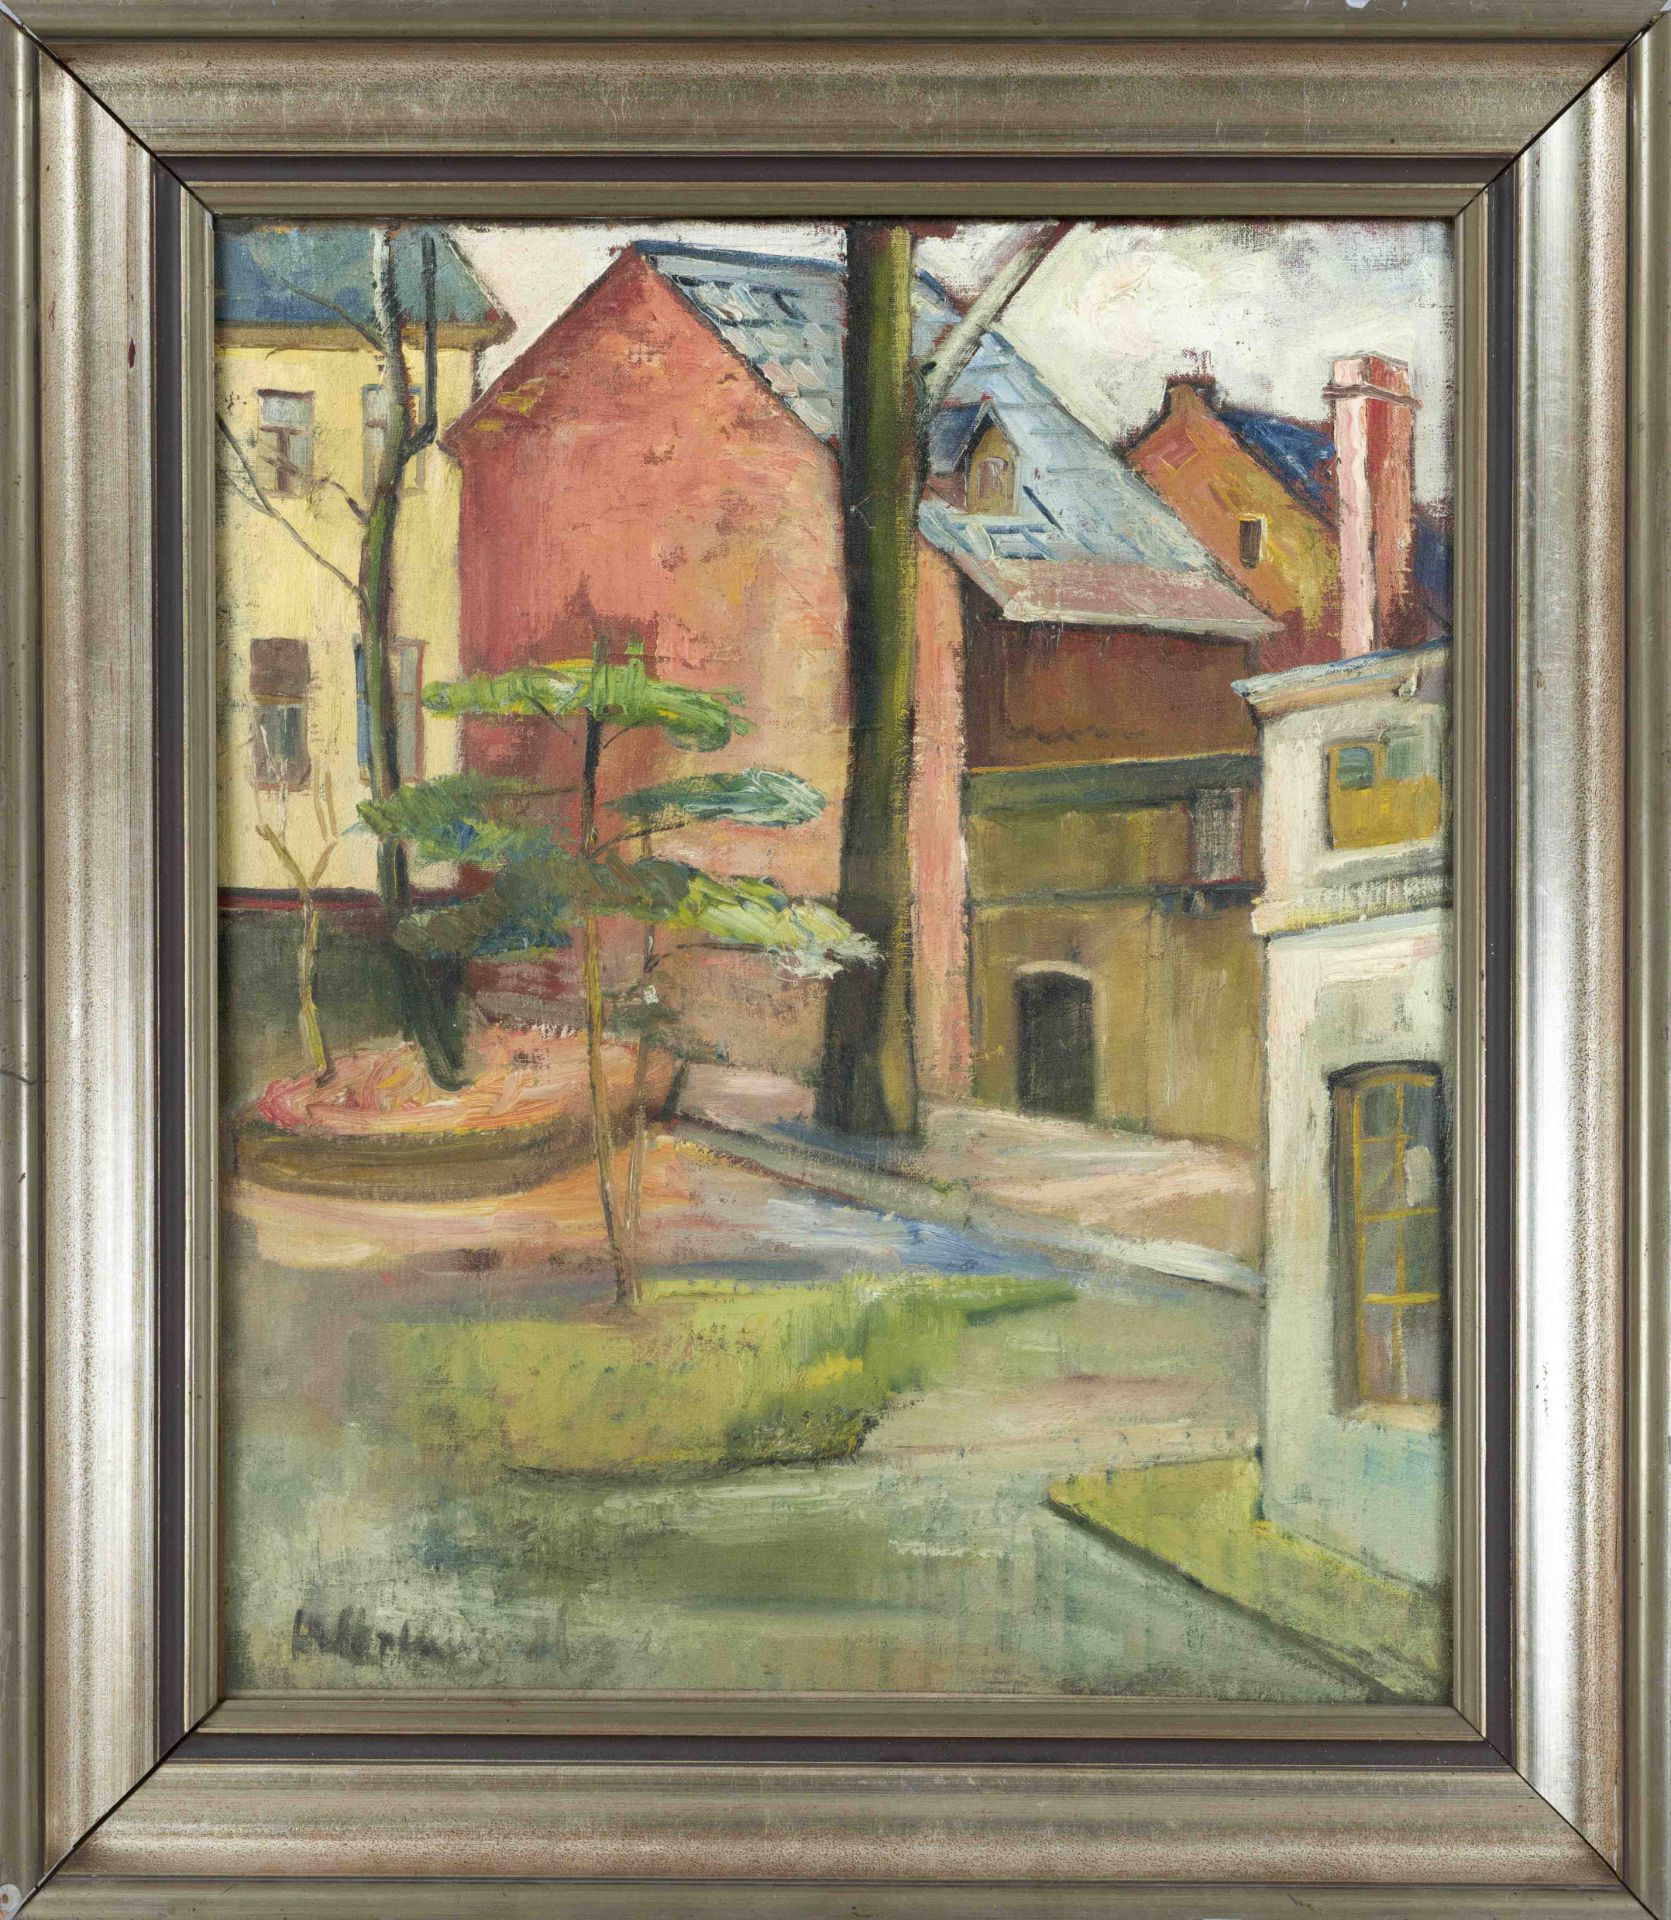 Unidentified artist c. 1900, Village square, oil on canvas, indistinctly signed lower left, 65 x